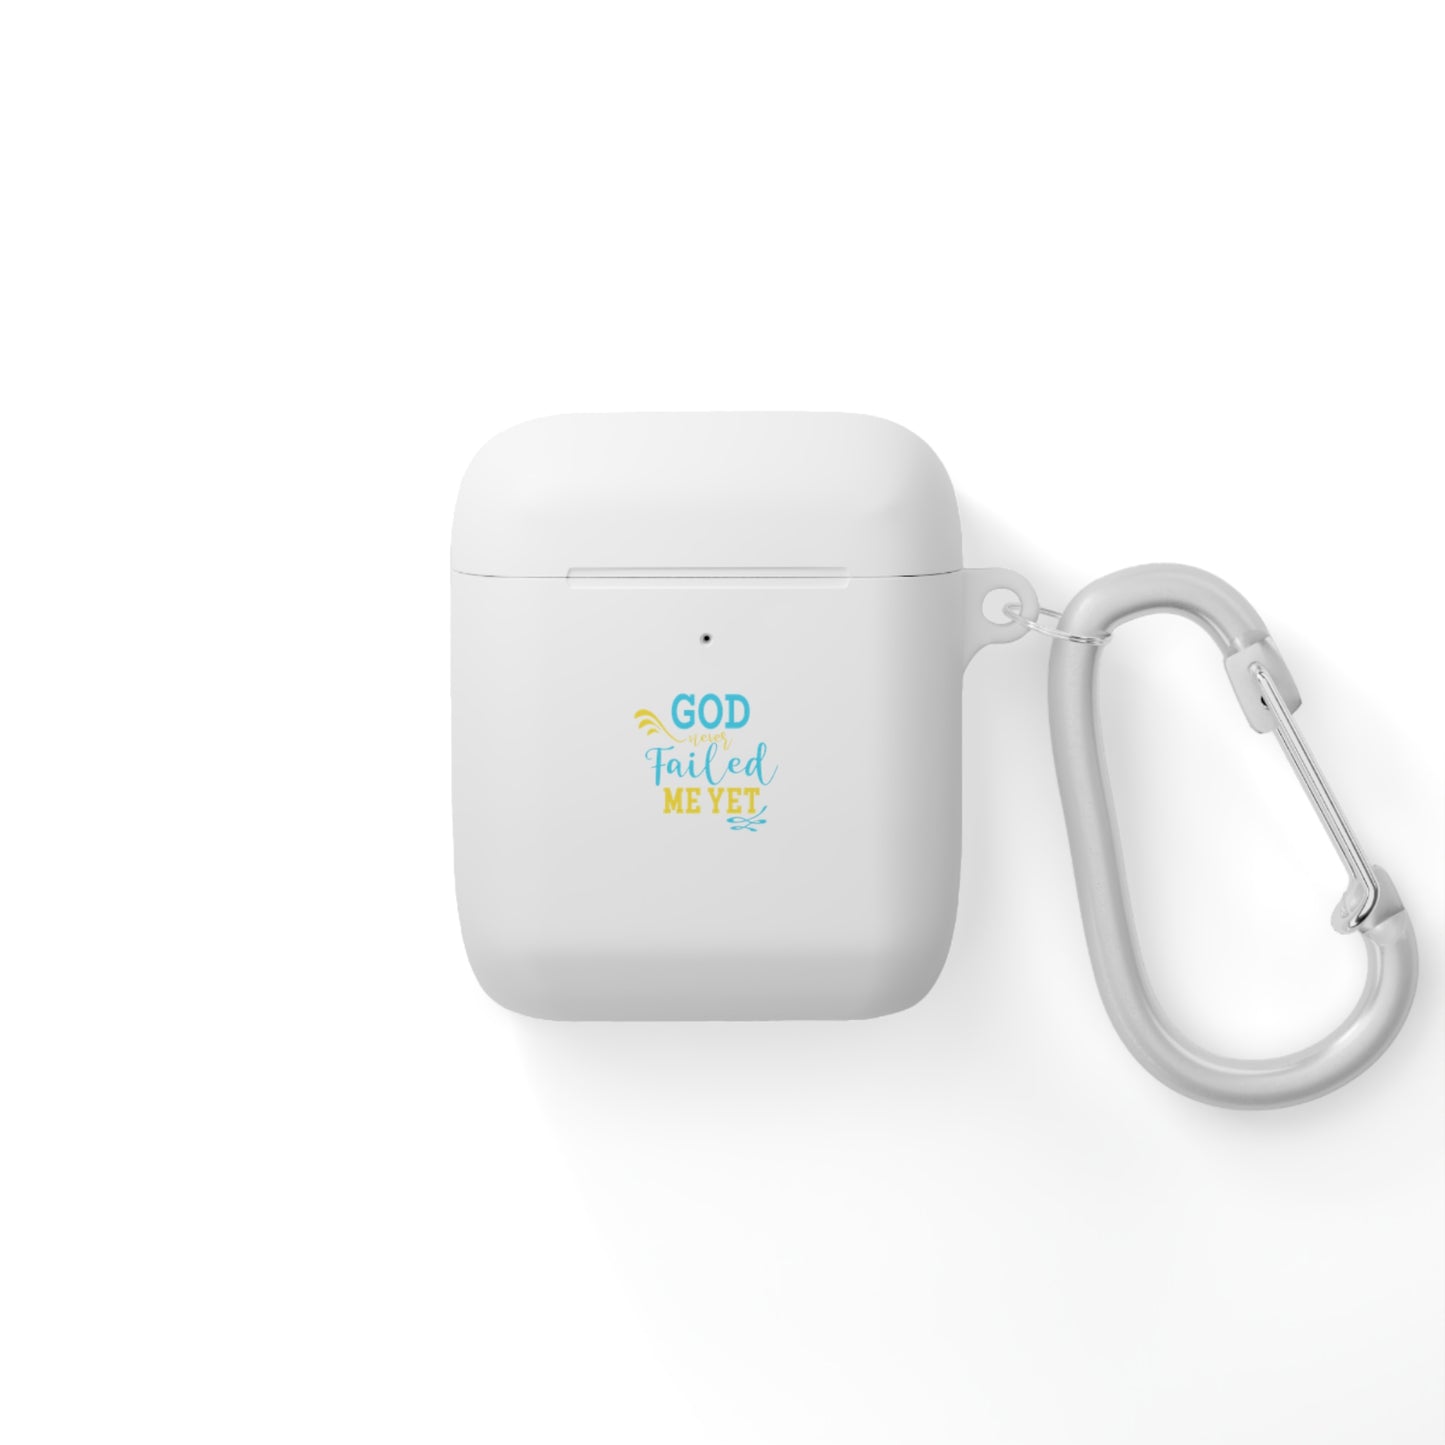 God Never Failed Me Yet Airpod / Airpods Pro Case cover